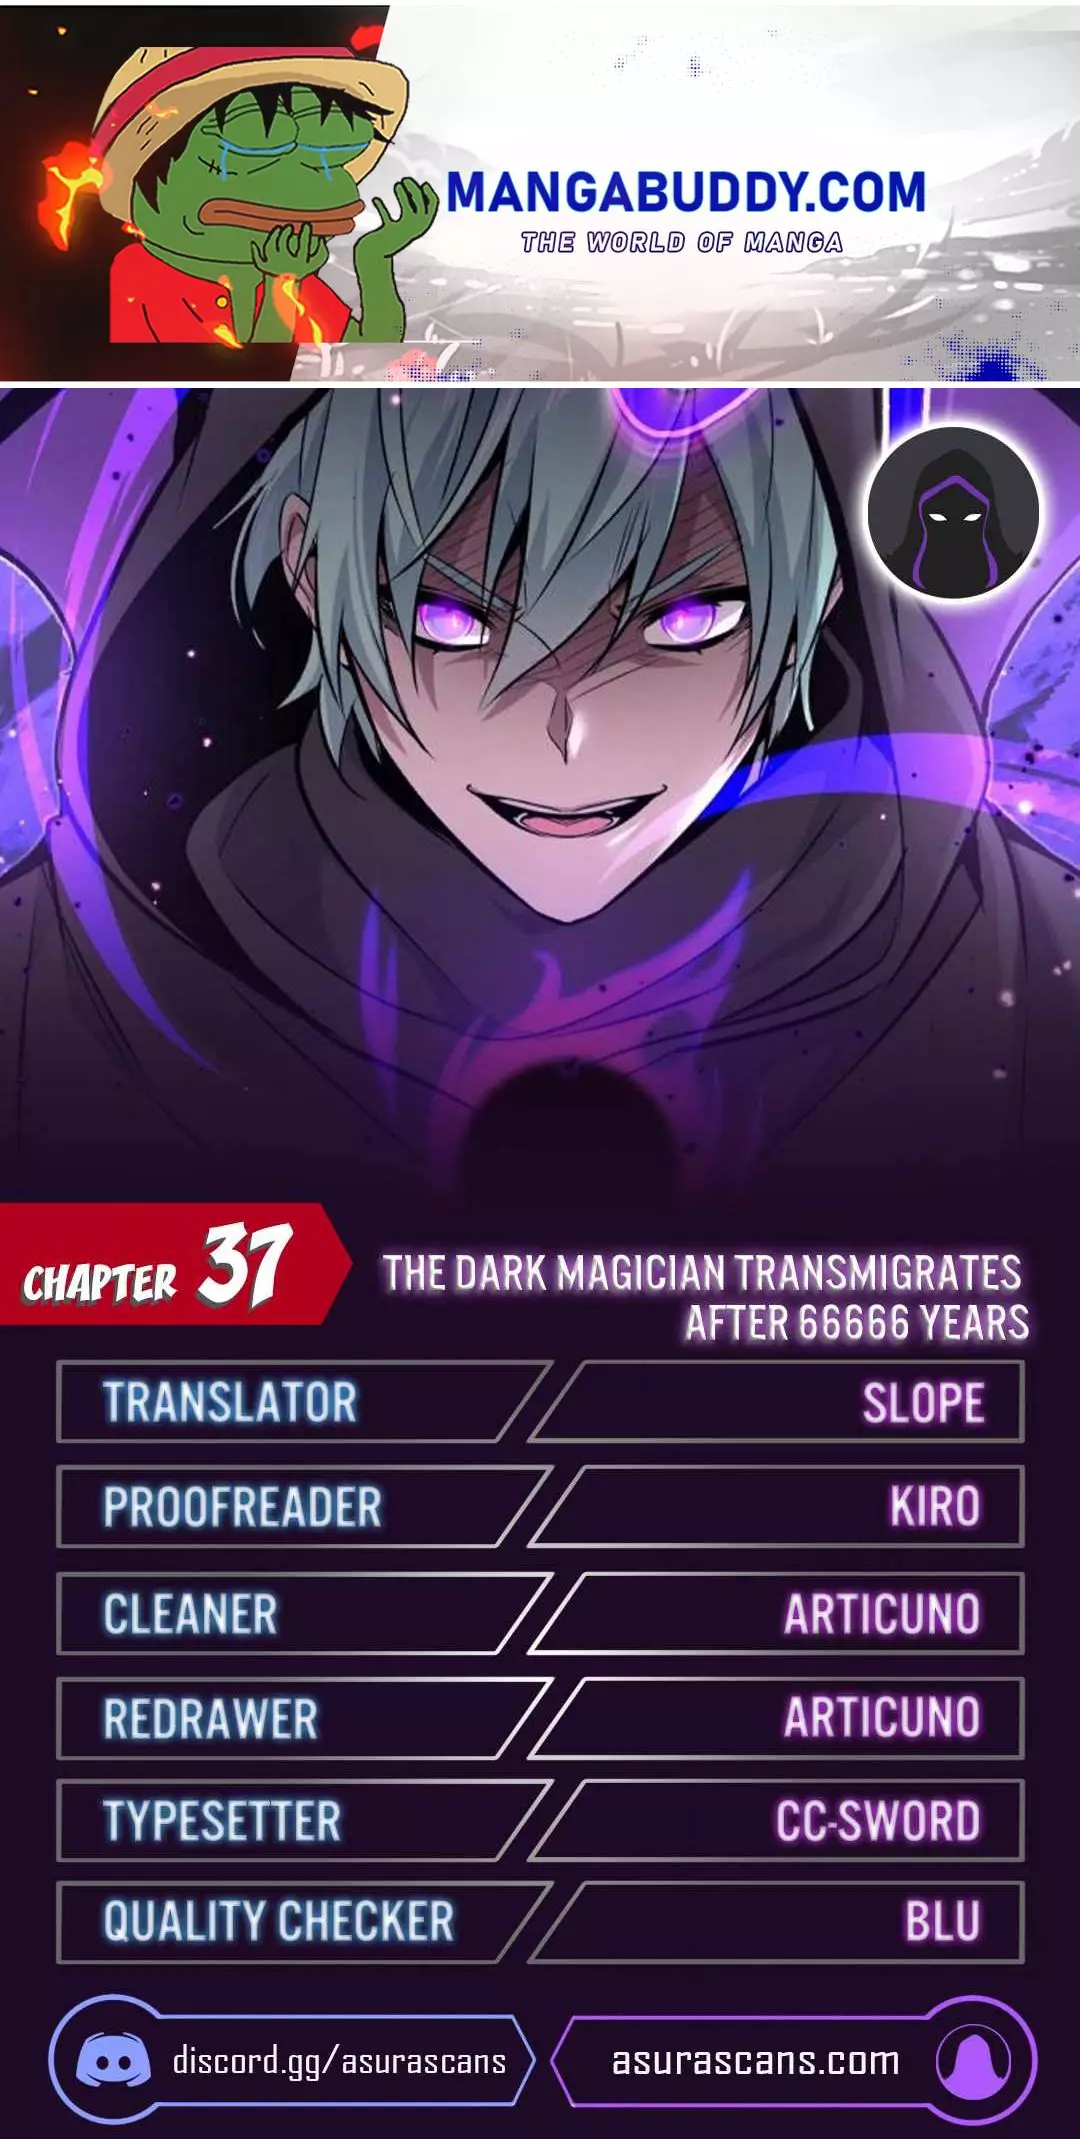 The Dark Magician Transmigrates After 66666 Years - 37 page 1-3bd6f16a